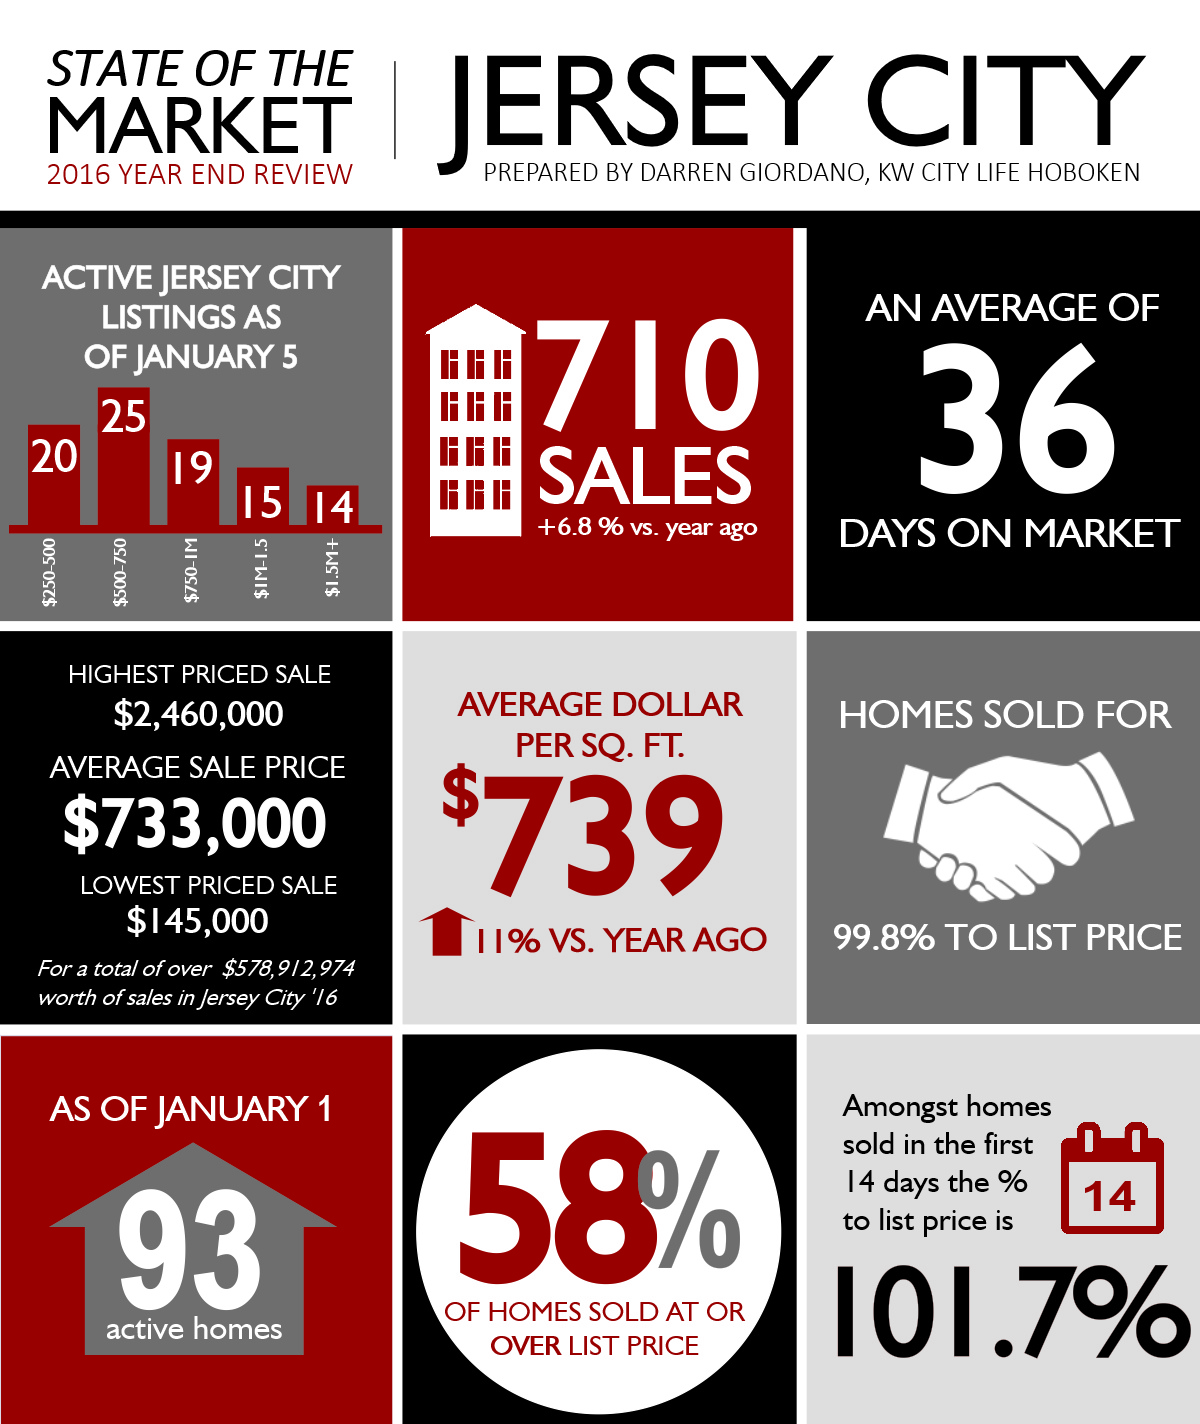 State of the Market - Jersey City 2016 Year End Review